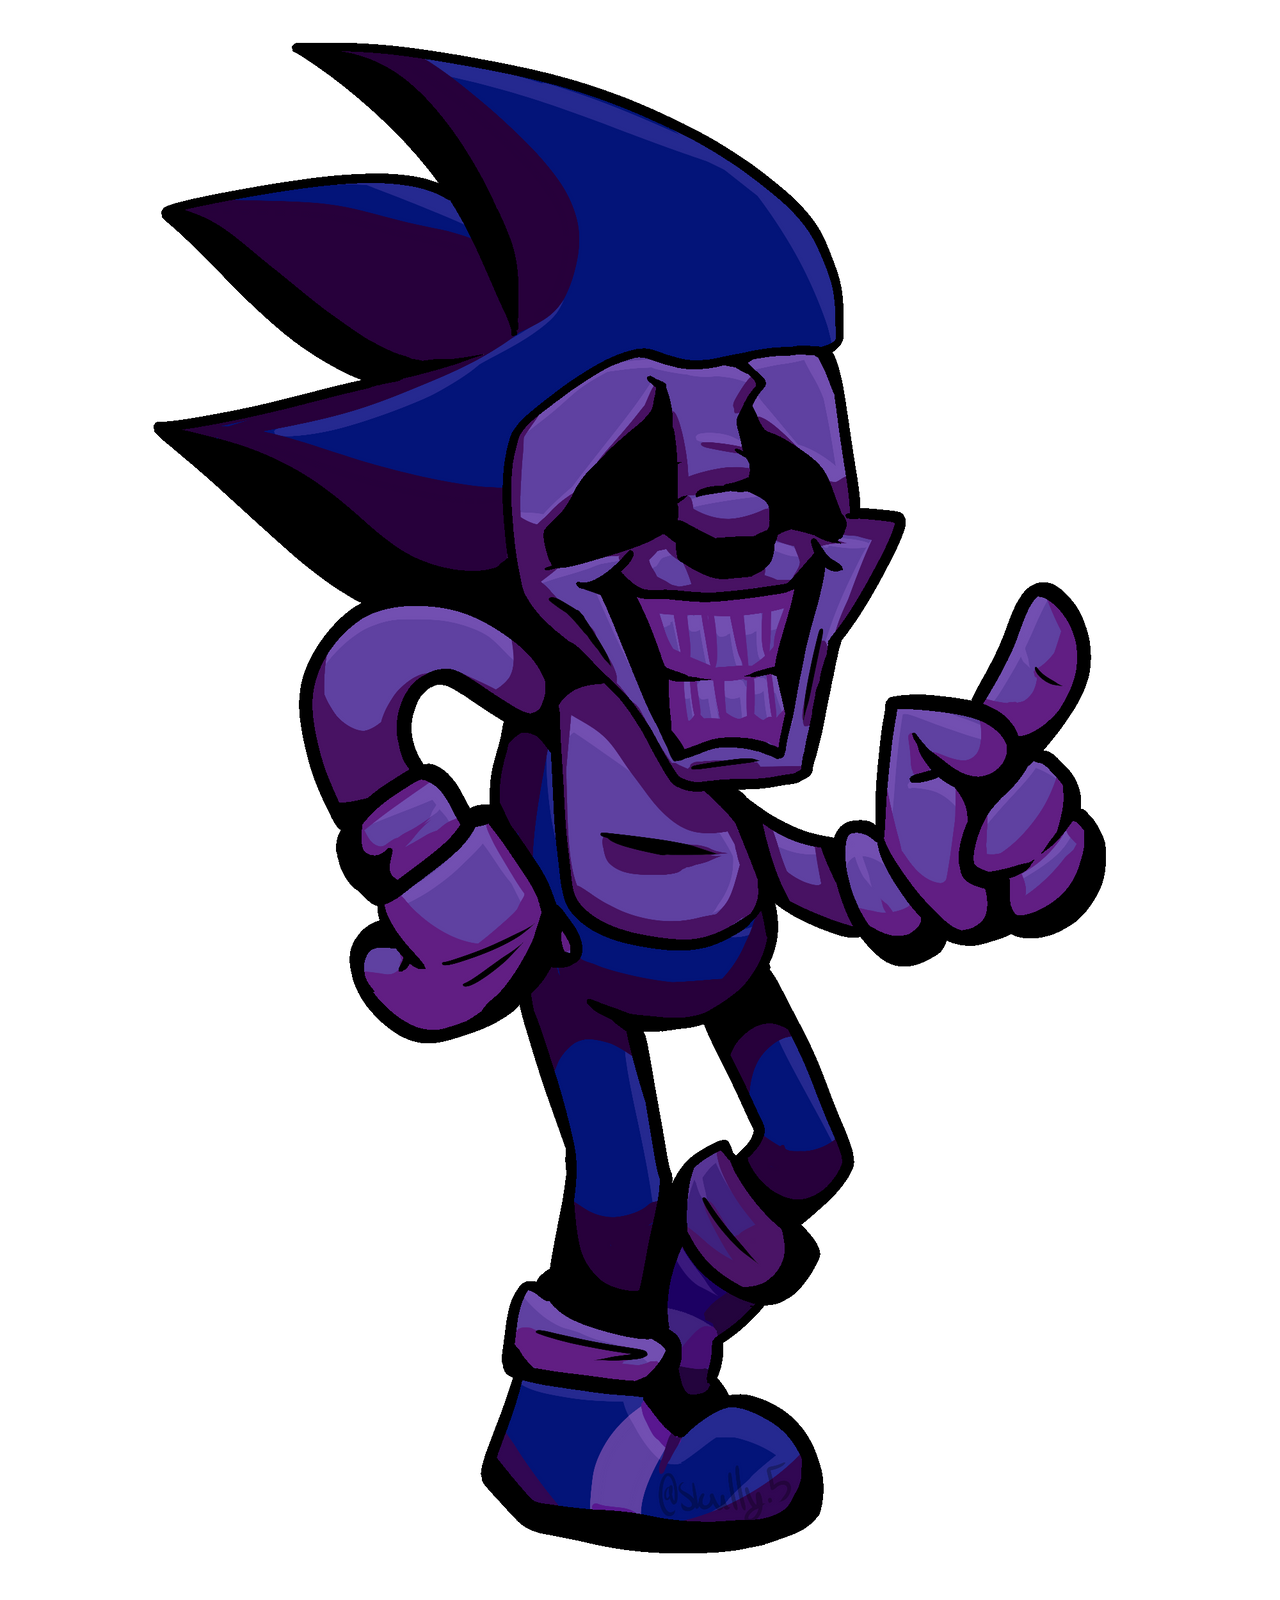 Pixilart - Thanks For 85 Followers + Majin Sonic Animation by